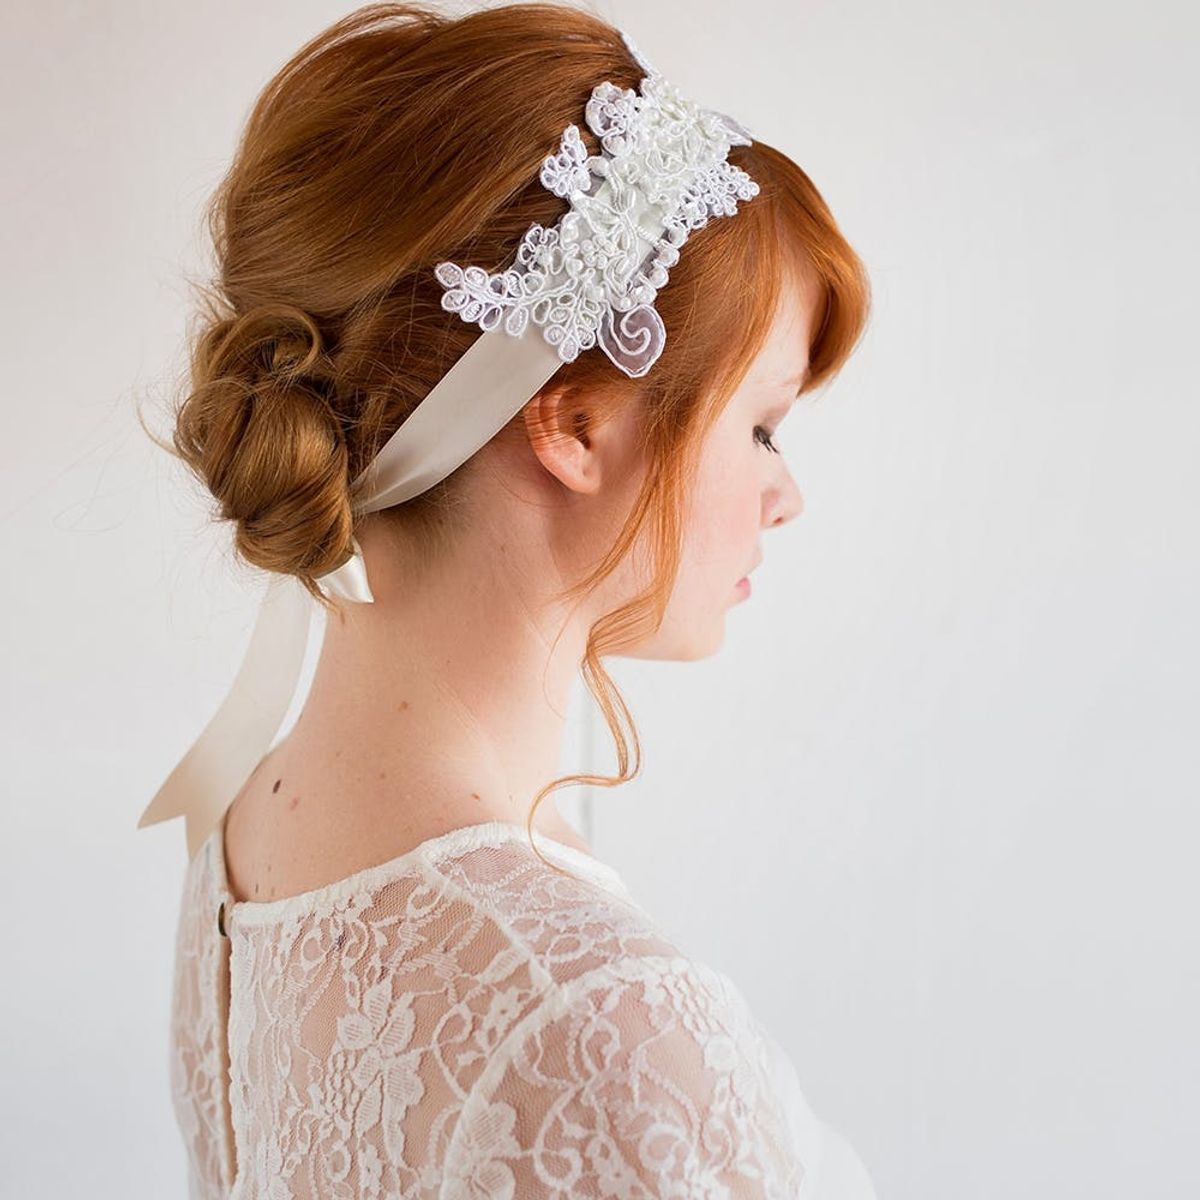 How to Make a Gorgeous Wedding Hair Accessory in Less Than 5 Minutes